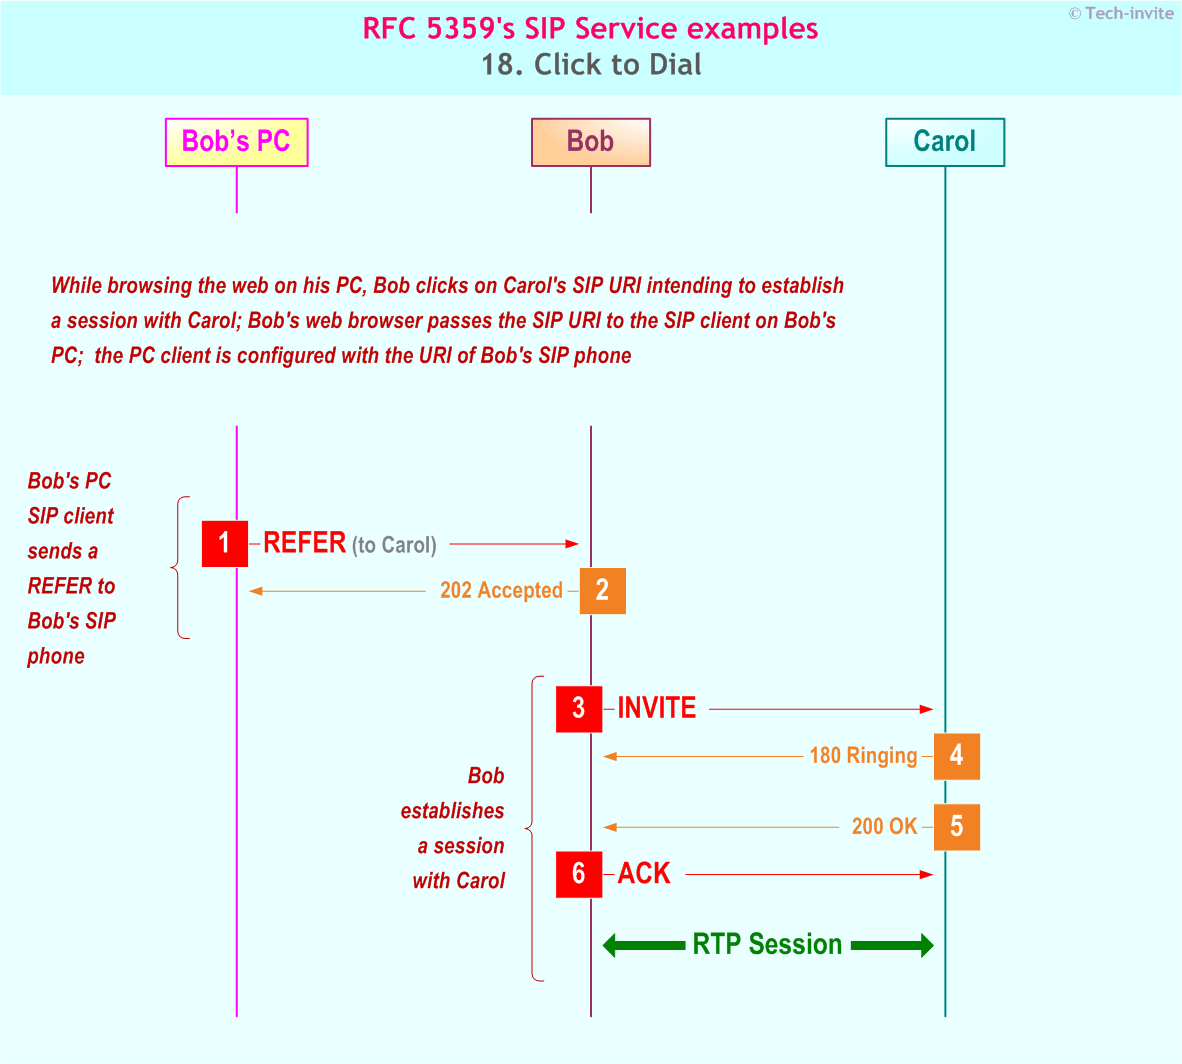 RFC 5359's Click to Dial SIP Service example: Sequence Chart